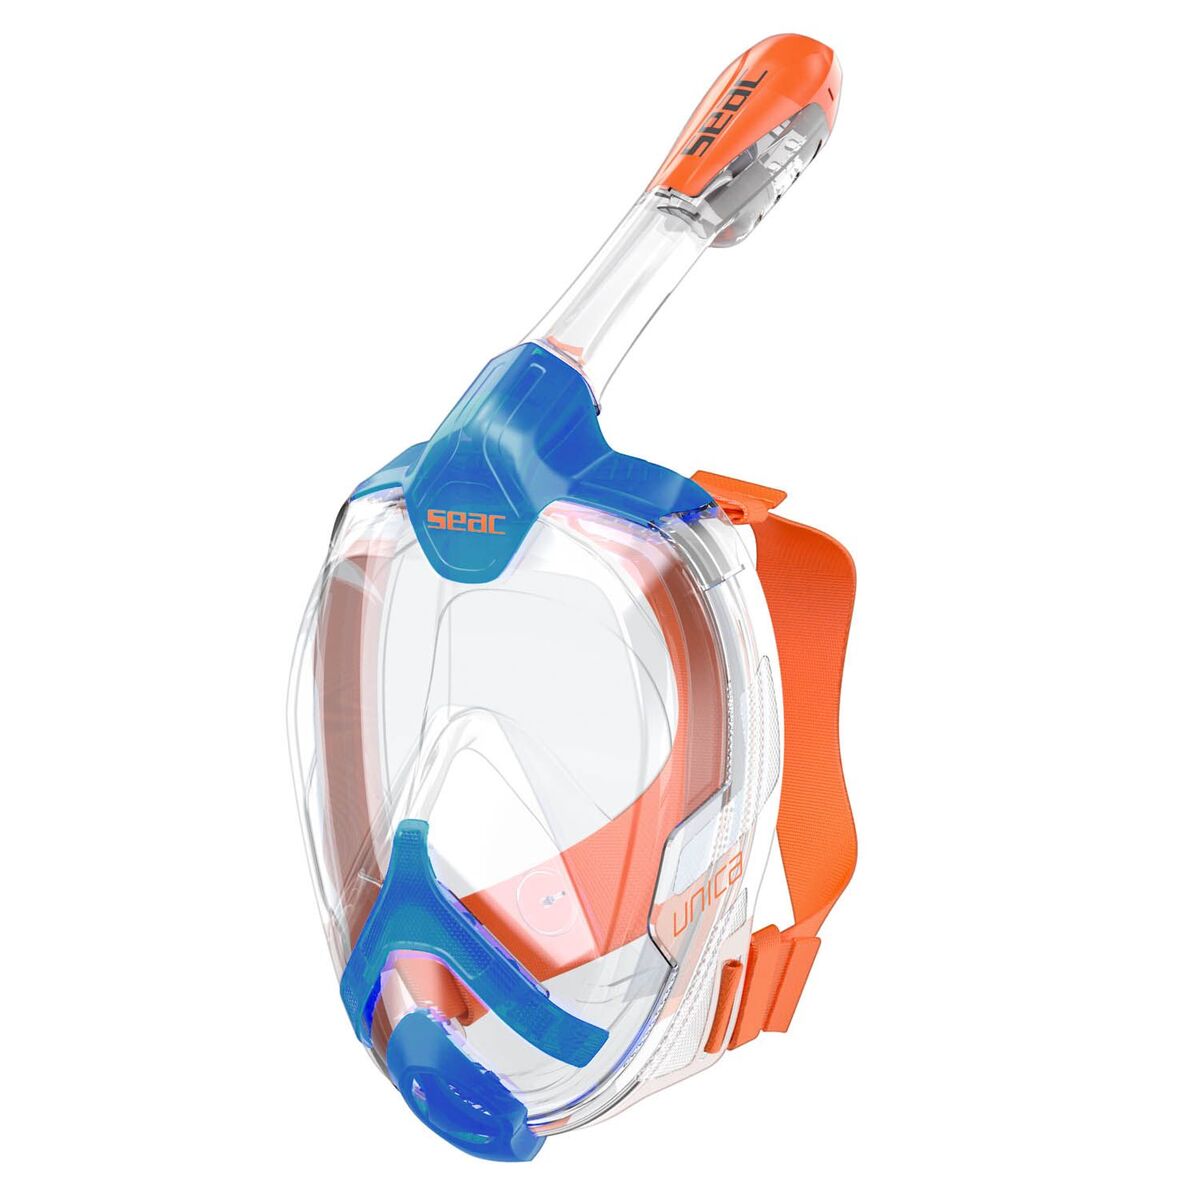 Seac Sub Unica Snorkeling Mask - XL in Blue